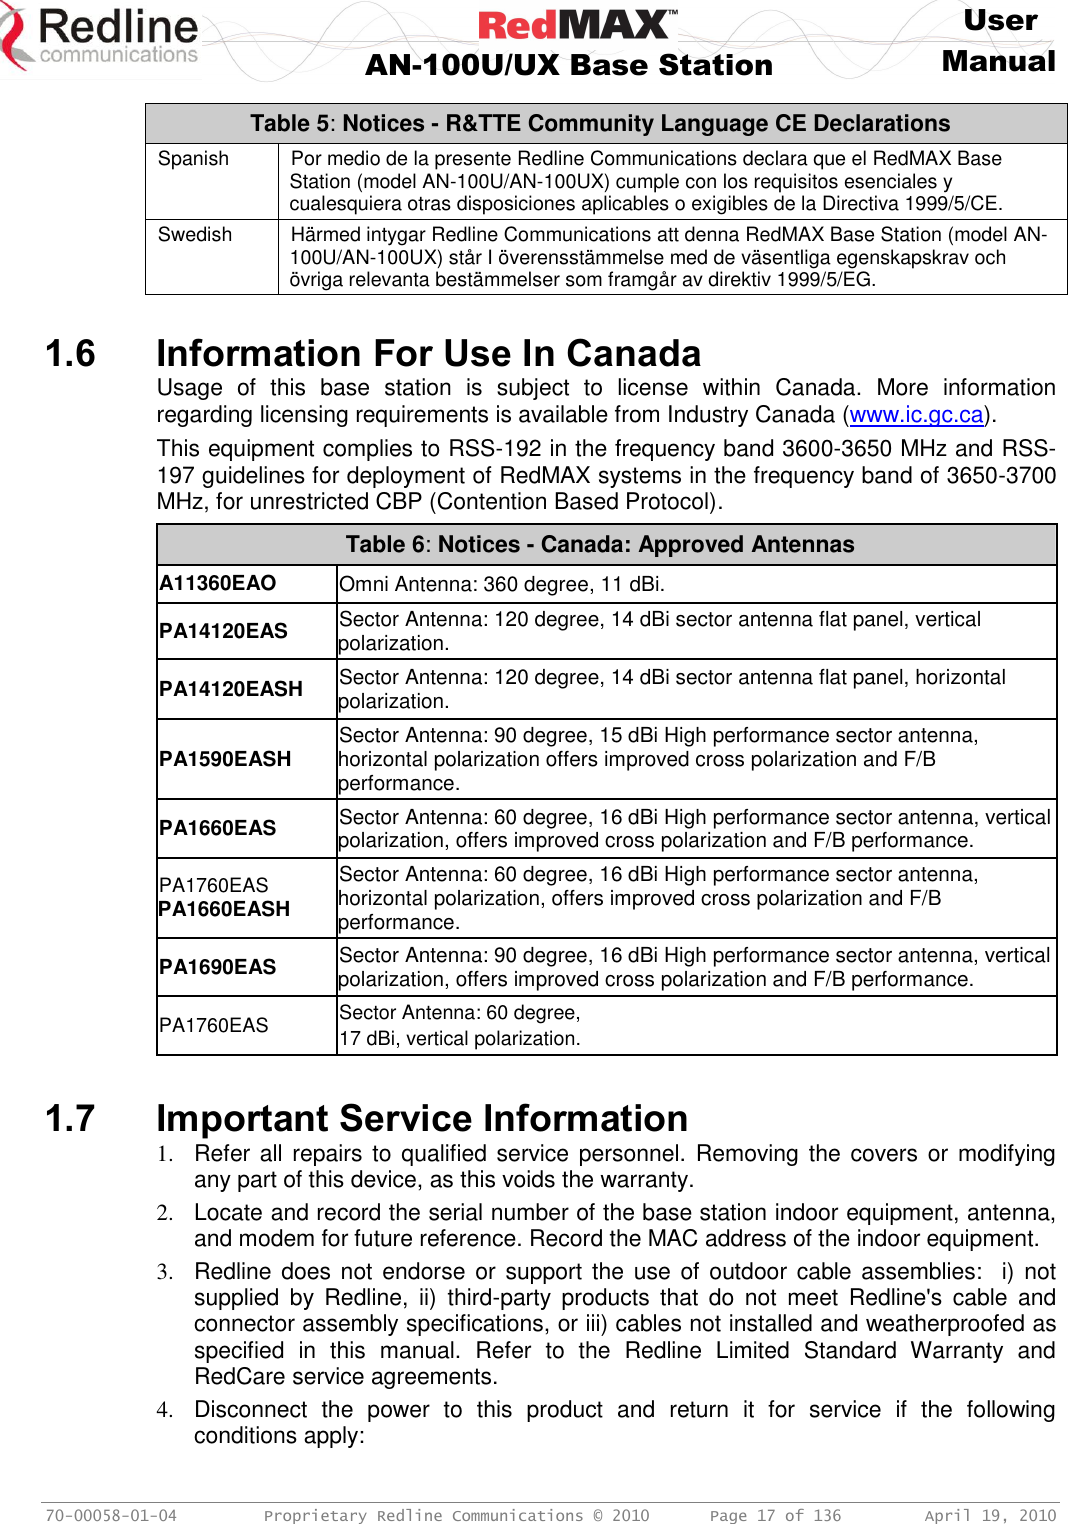     User  AN-100U/UX Base Station Manual   70-00058-01-04  Proprietary Redline Communications © 2010   Page 17 of 136  April 19, 2010 Table 5: Notices - R&amp;TTE Community Language CE Declarations Spanish Por medio de la presente Redline Communications declara que el RedMAX Base Station (model AN-100U/AN-100UX) cumple con los requisitos esenciales y cualesquiera otras disposiciones aplicables o exigibles de la Directiva 1999/5/CE. Swedish Härmed intygar Redline Communications att denna RedMAX Base Station (model AN-100U/AN-100UX) står I överensstämmelse med de väsentliga egenskapskrav och övriga relevanta bestämmelser som framgår av direktiv 1999/5/EG.    1.6 Information For Use In Canada Usage  of  this  base  station  is  subject  to  license  within  Canada.  More  information regarding licensing requirements is available from Industry Canada (www.ic.gc.ca).  This equipment complies to RSS-192 in the frequency band 3600-3650 MHz and RSS-197 guidelines for deployment of RedMAX systems in the frequency band of 3650-3700 MHz, for unrestricted CBP (Contention Based Protocol). Table 6: Notices - Canada: Approved Antennas A11360EAO Omni Antenna: 360 degree, 11 dBi. PA14120EAS Sector Antenna: 120 degree, 14 dBi sector antenna flat panel, vertical polarization. PA14120EASH Sector Antenna: 120 degree, 14 dBi sector antenna flat panel, horizontal polarization. PA1590EASH Sector Antenna: 90 degree, 15 dBi High performance sector antenna, horizontal polarization offers improved cross polarization and F/B performance. PA1660EAS Sector Antenna: 60 degree, 16 dBi High performance sector antenna, vertical polarization, offers improved cross polarization and F/B performance. PA1760EAS PA1660EASH Sector Antenna: 60 degree, 16 dBi High performance sector antenna, horizontal polarization, offers improved cross polarization and F/B performance. PA1690EAS Sector Antenna: 90 degree, 16 dBi High performance sector antenna, vertical polarization, offers improved cross polarization and F/B performance. PA1760EAS Sector Antenna: 60 degree, 17 dBi, vertical polarization.    1.7 Important Service Information 1.  Refer all repairs to qualified service personnel. Removing the covers or modifying any part of this device, as this voids the warranty. 2.  Locate and record the serial number of the base station indoor equipment, antenna, and modem for future reference. Record the MAC address of the indoor equipment. 3.  Redline does not endorse  or support  the use  of outdoor cable  assemblies:  i) not supplied  by  Redline,  ii)  third-party  products  that  do  not  meet  Redline&apos;s  cable  and connector assembly specifications, or iii) cables not installed and weatherproofed as specified  in  this  manual.  Refer  to  the  Redline  Limited  Standard  Warranty  and RedCare service agreements. 4.  Disconnect  the  power  to  this  product  and  return  it  for  service  if  the  following conditions apply: 